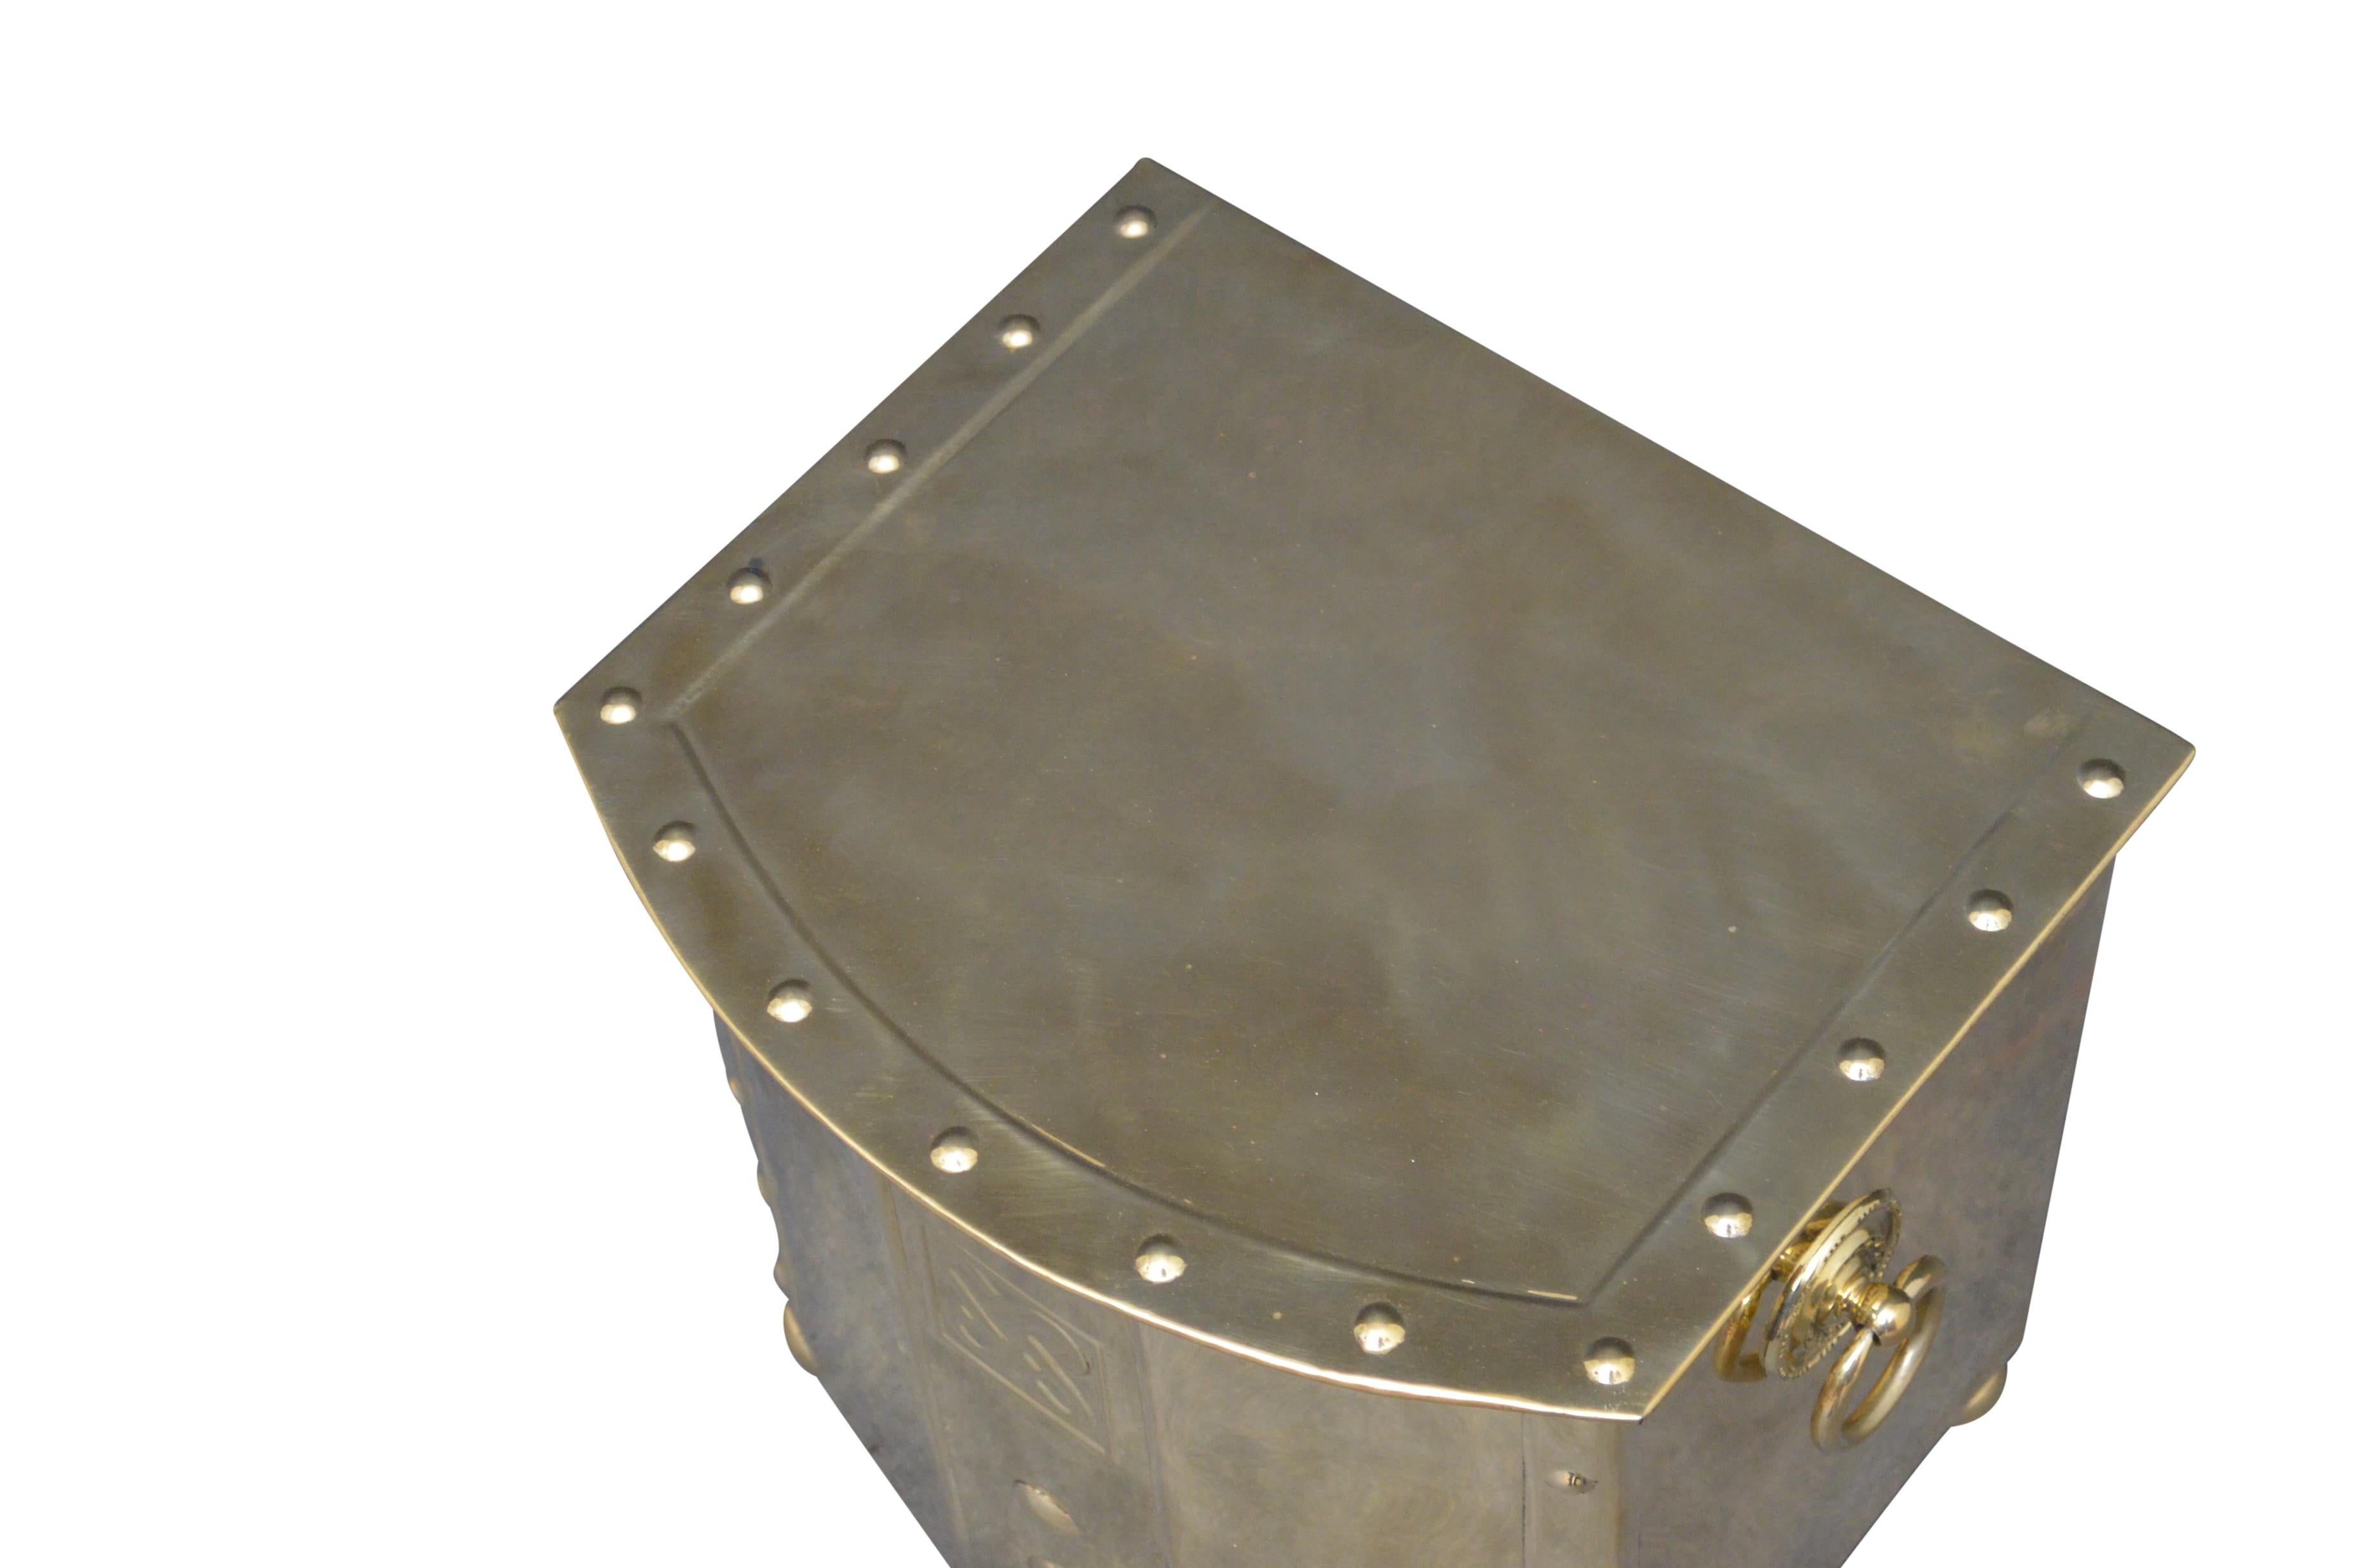 Art Deco brass log or coal bin with original removable linker, carrying handles and bun feet. Cleaned, polished and ready to use at home. c1930
Measures: H 12